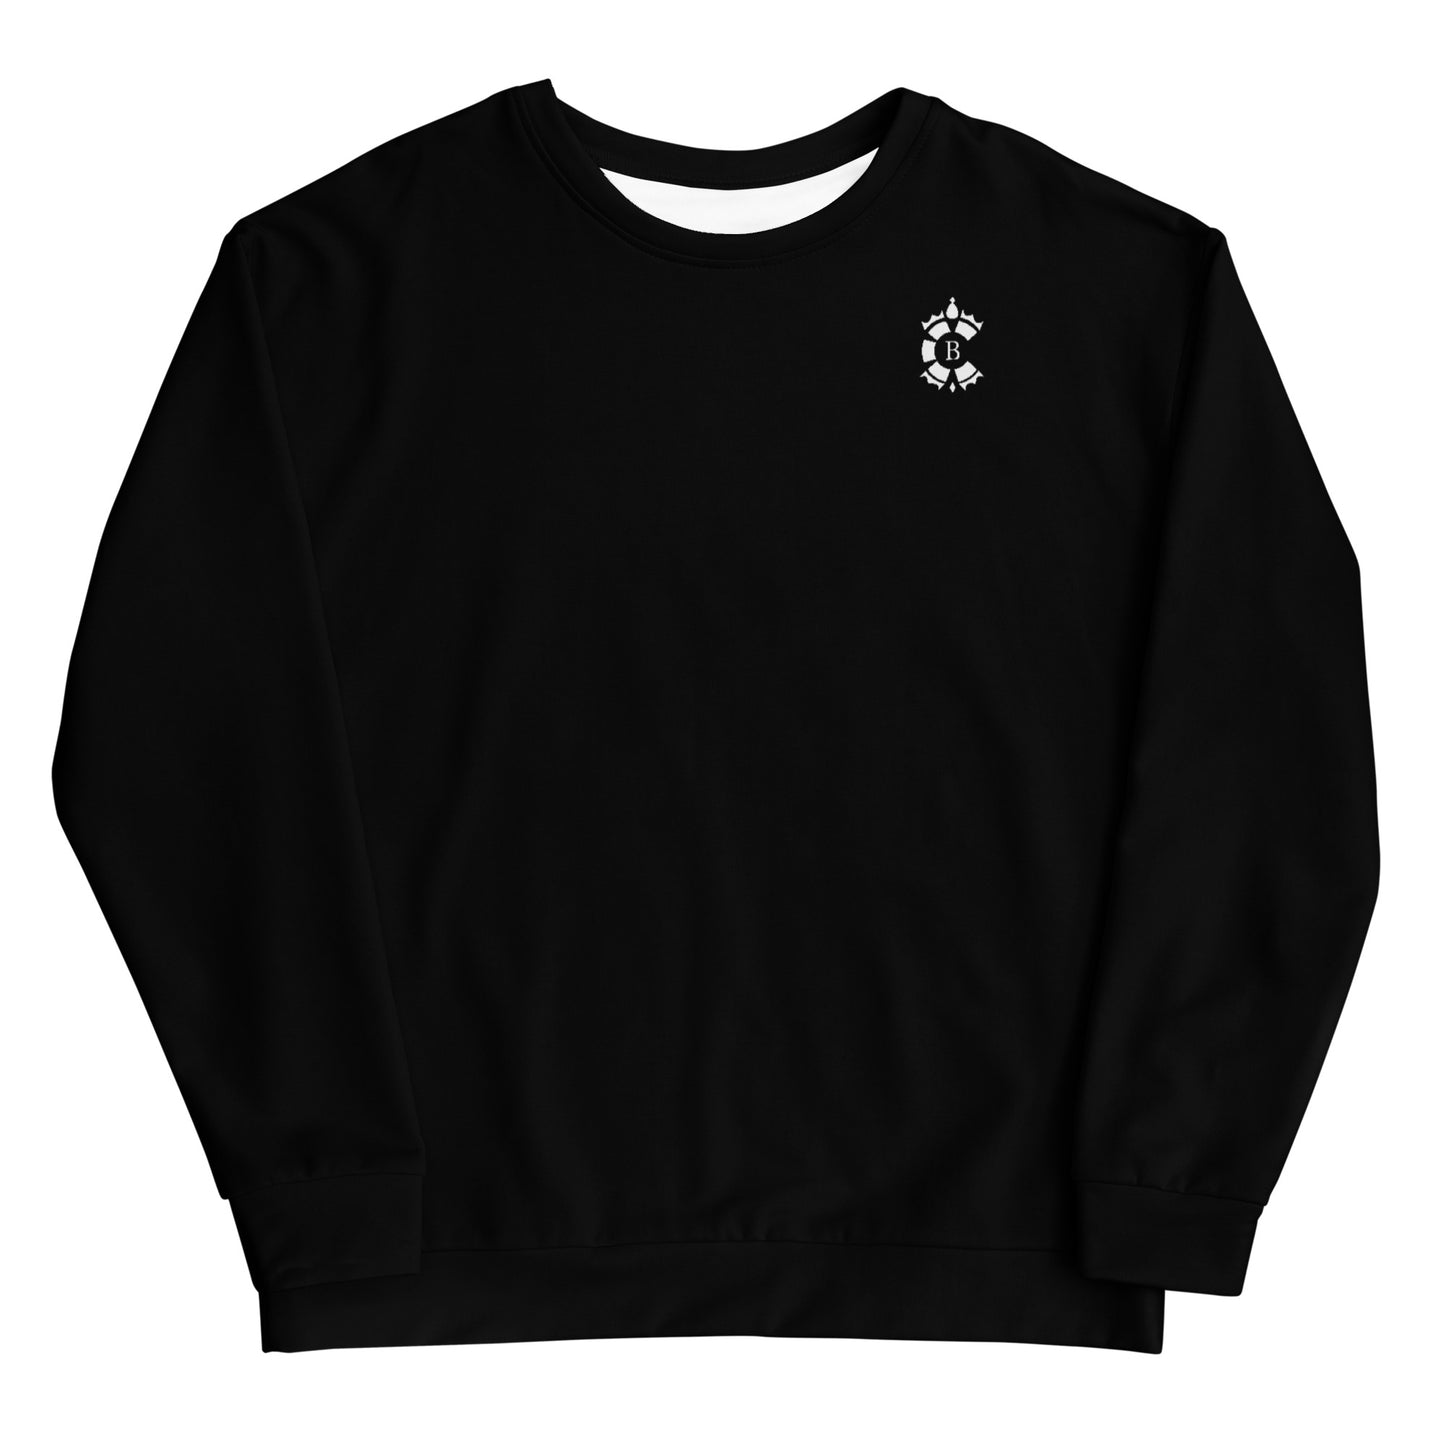 CONTRABRANDED Logo Sweater White on Black